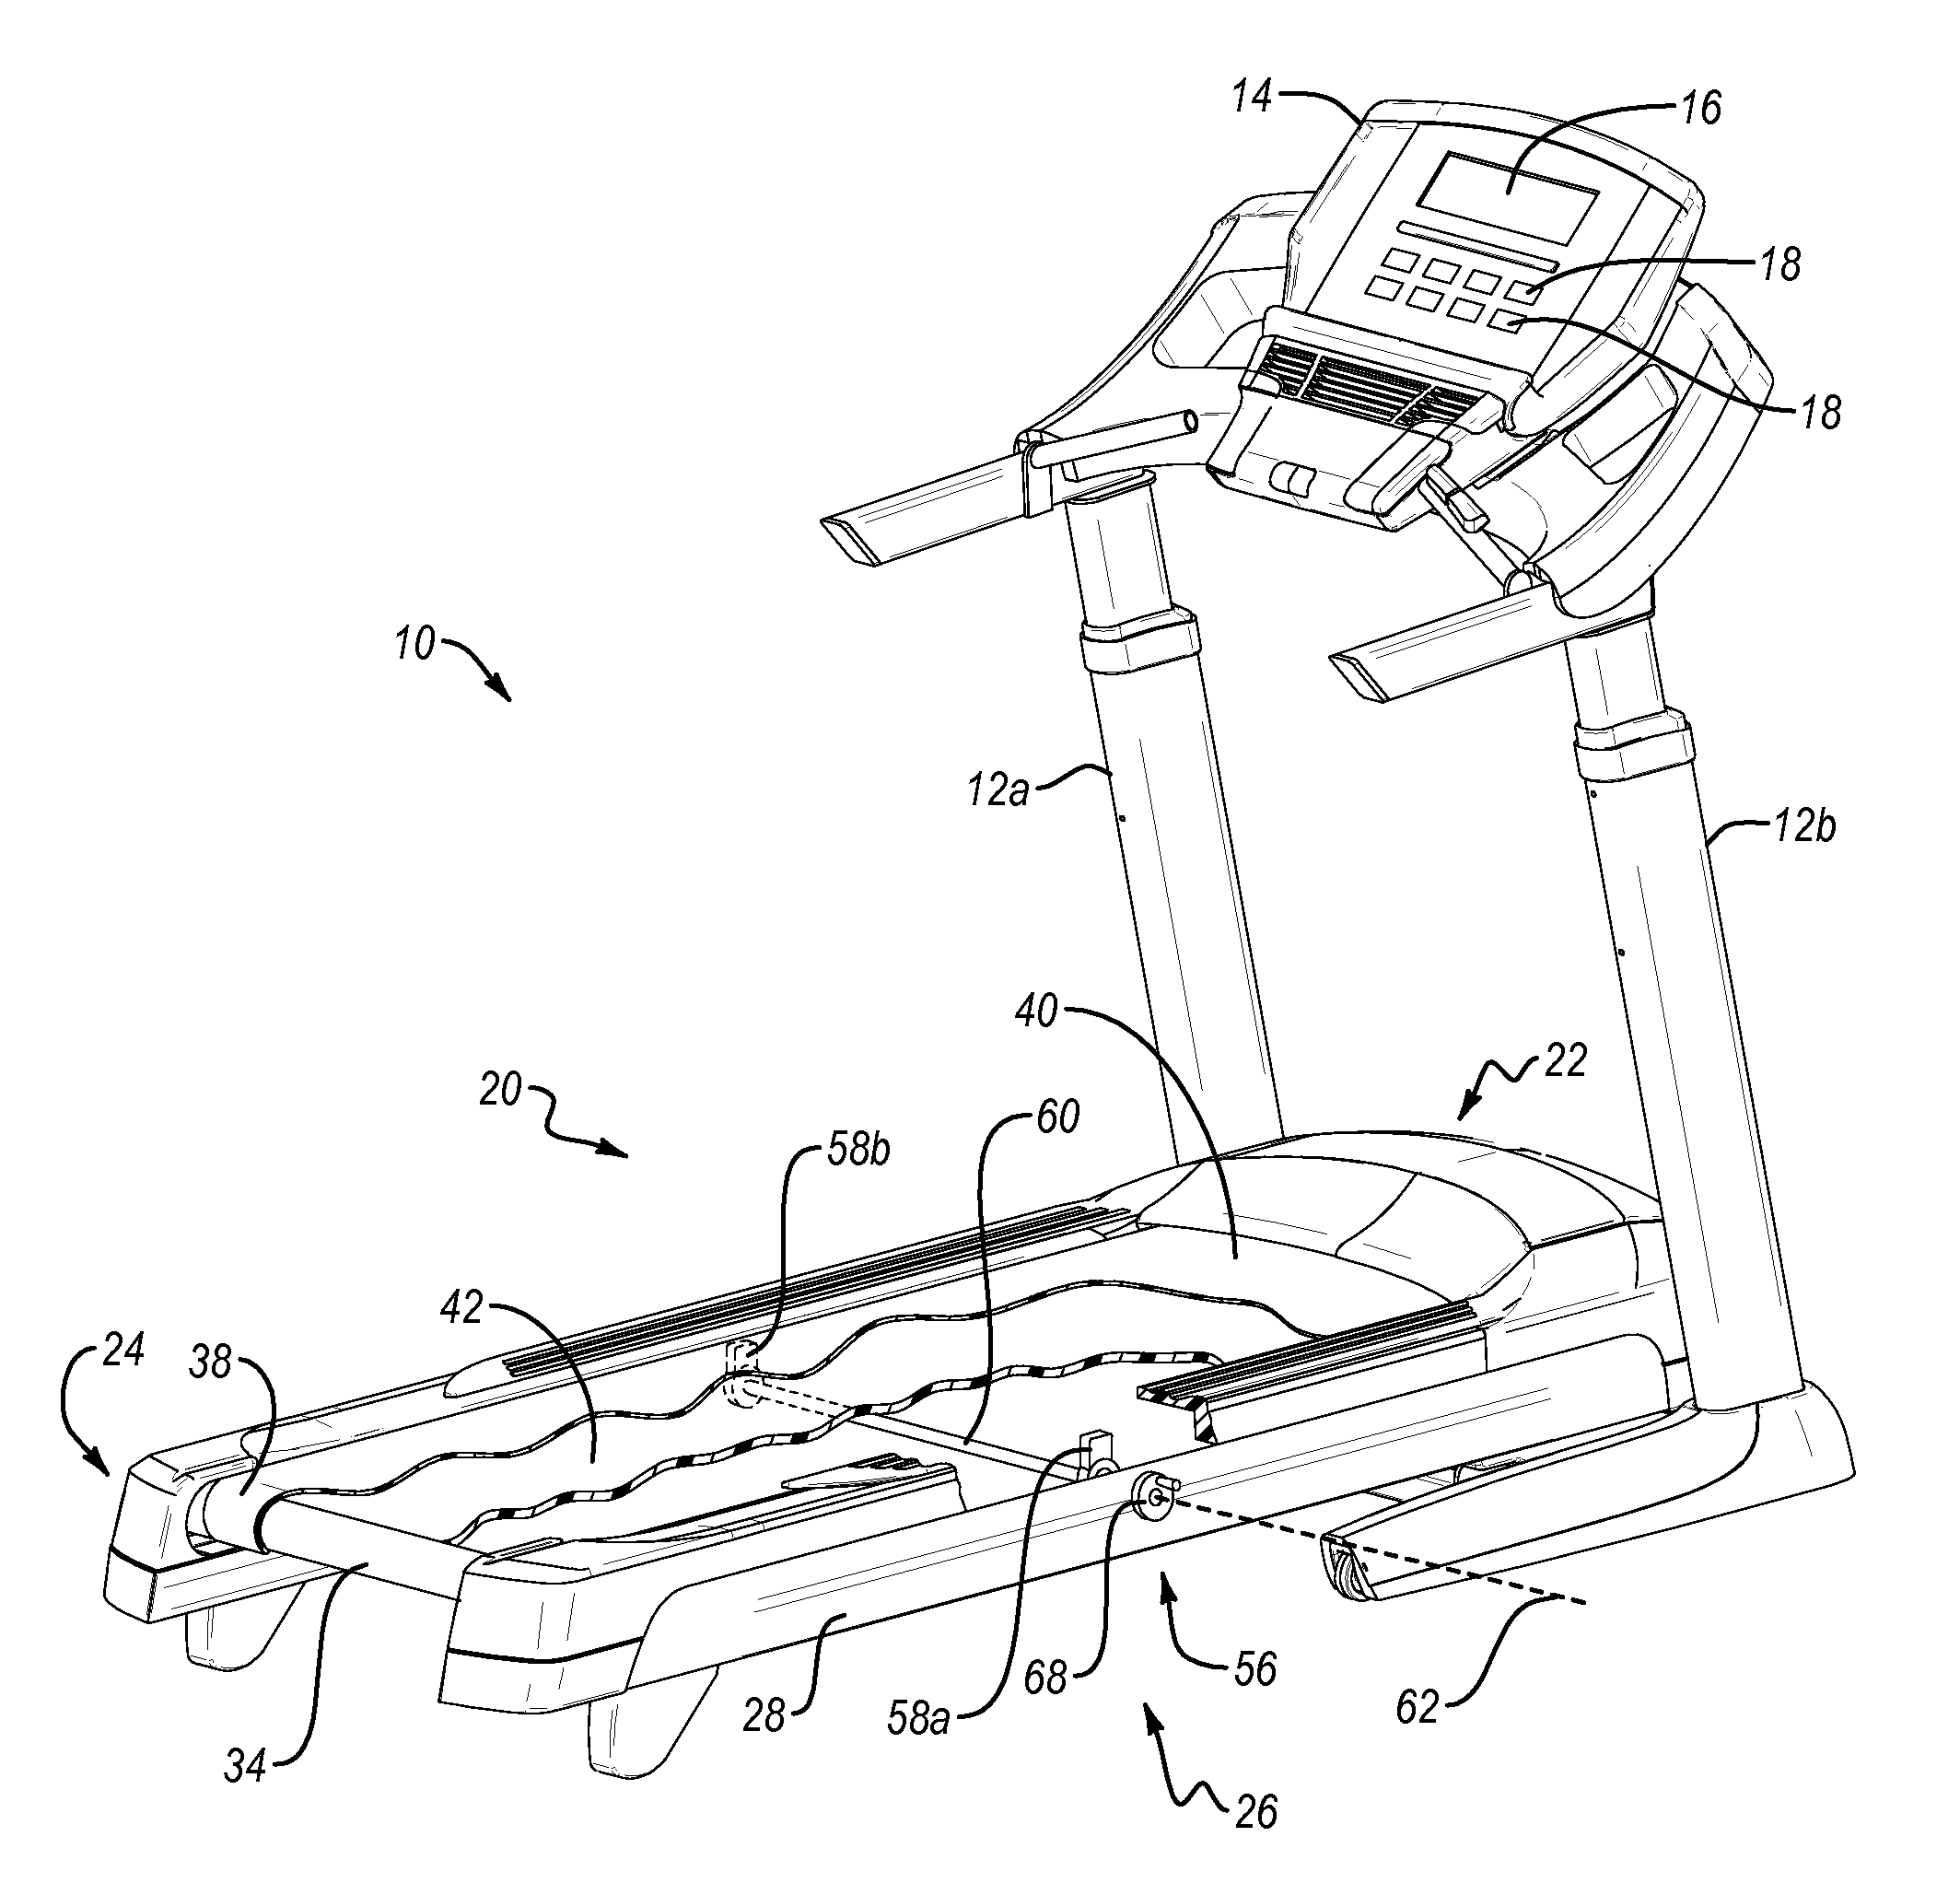 Treadmill with selectively engageable deck stiffening mechanism